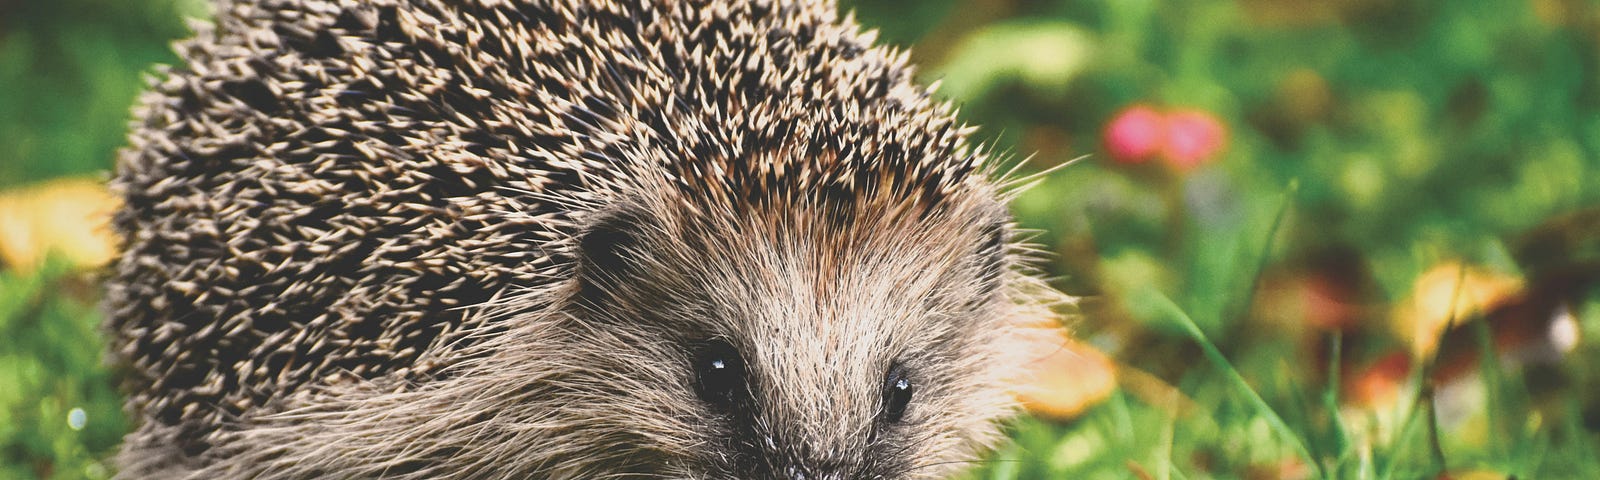 A hedgehog on a grassy area with fallen leaves around it.